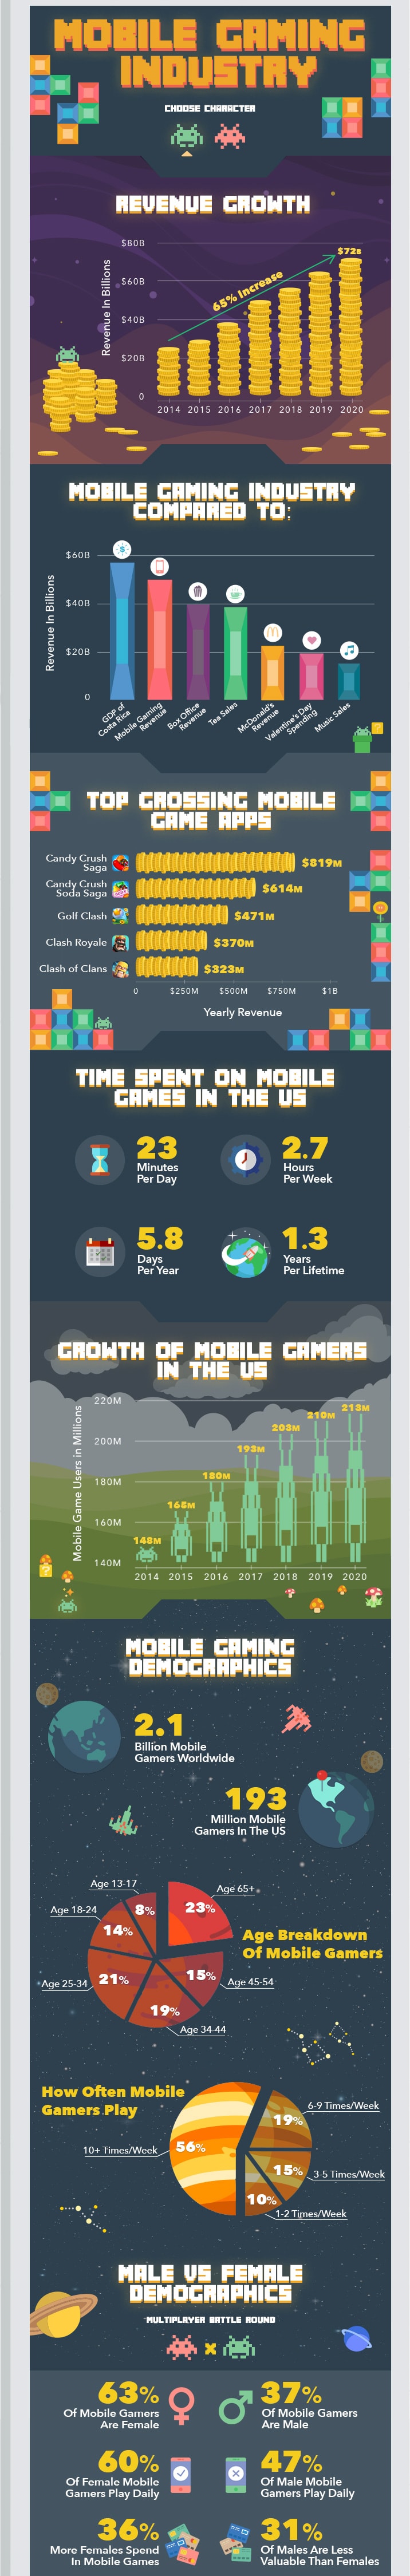 Mobile Game study females overpopulate male players statistics demographics infographics 